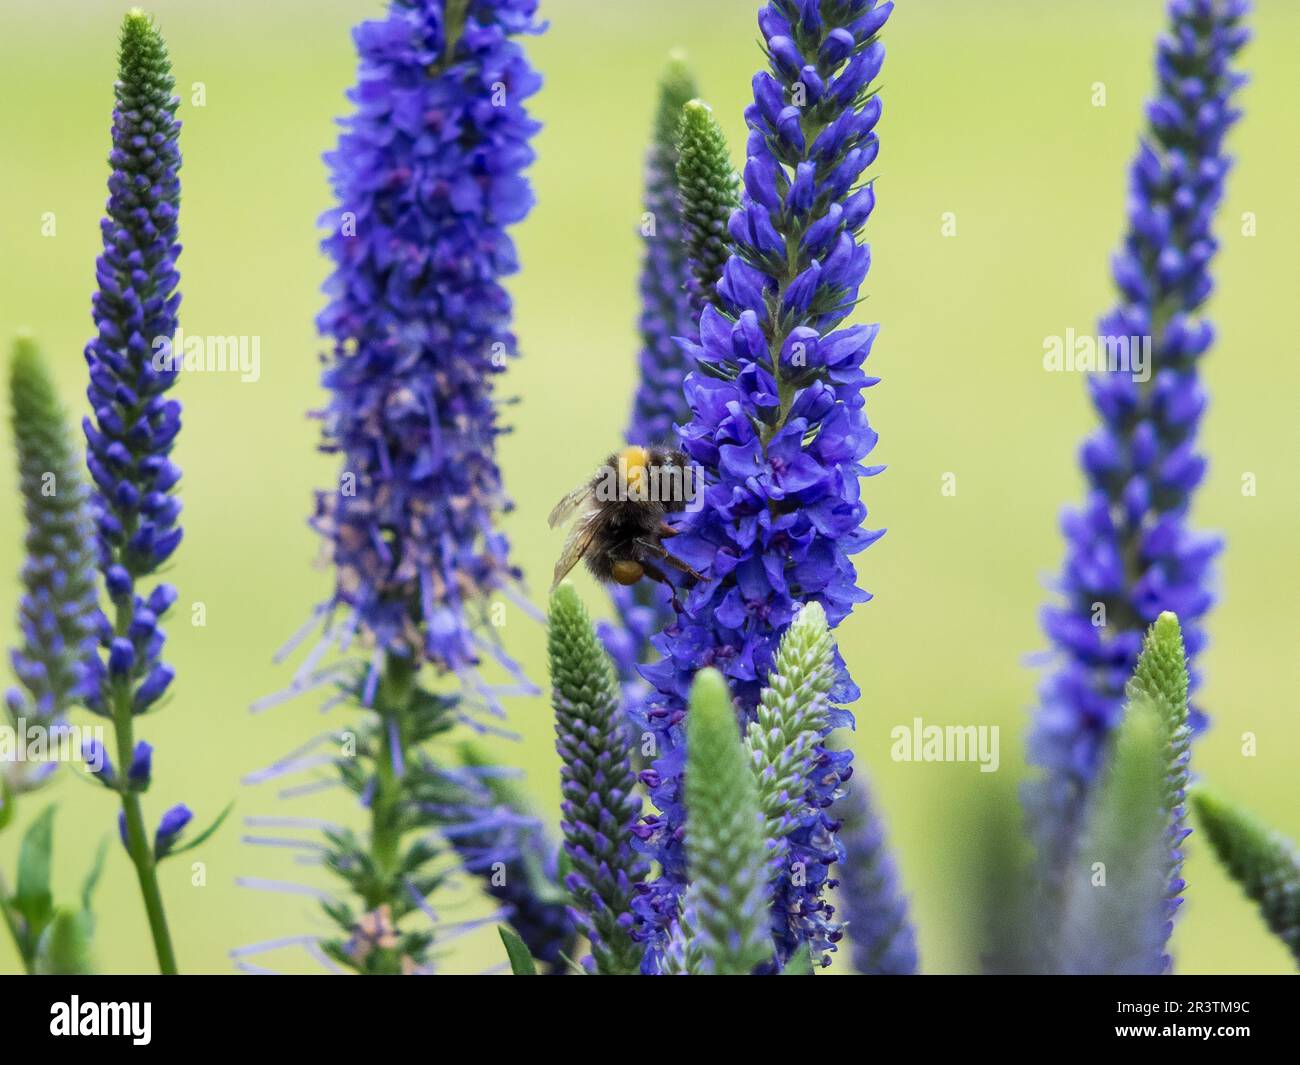 Bee gathering nectar from (Veronica Spicata) Ulster Dwarf Blue flowers Stock Photo